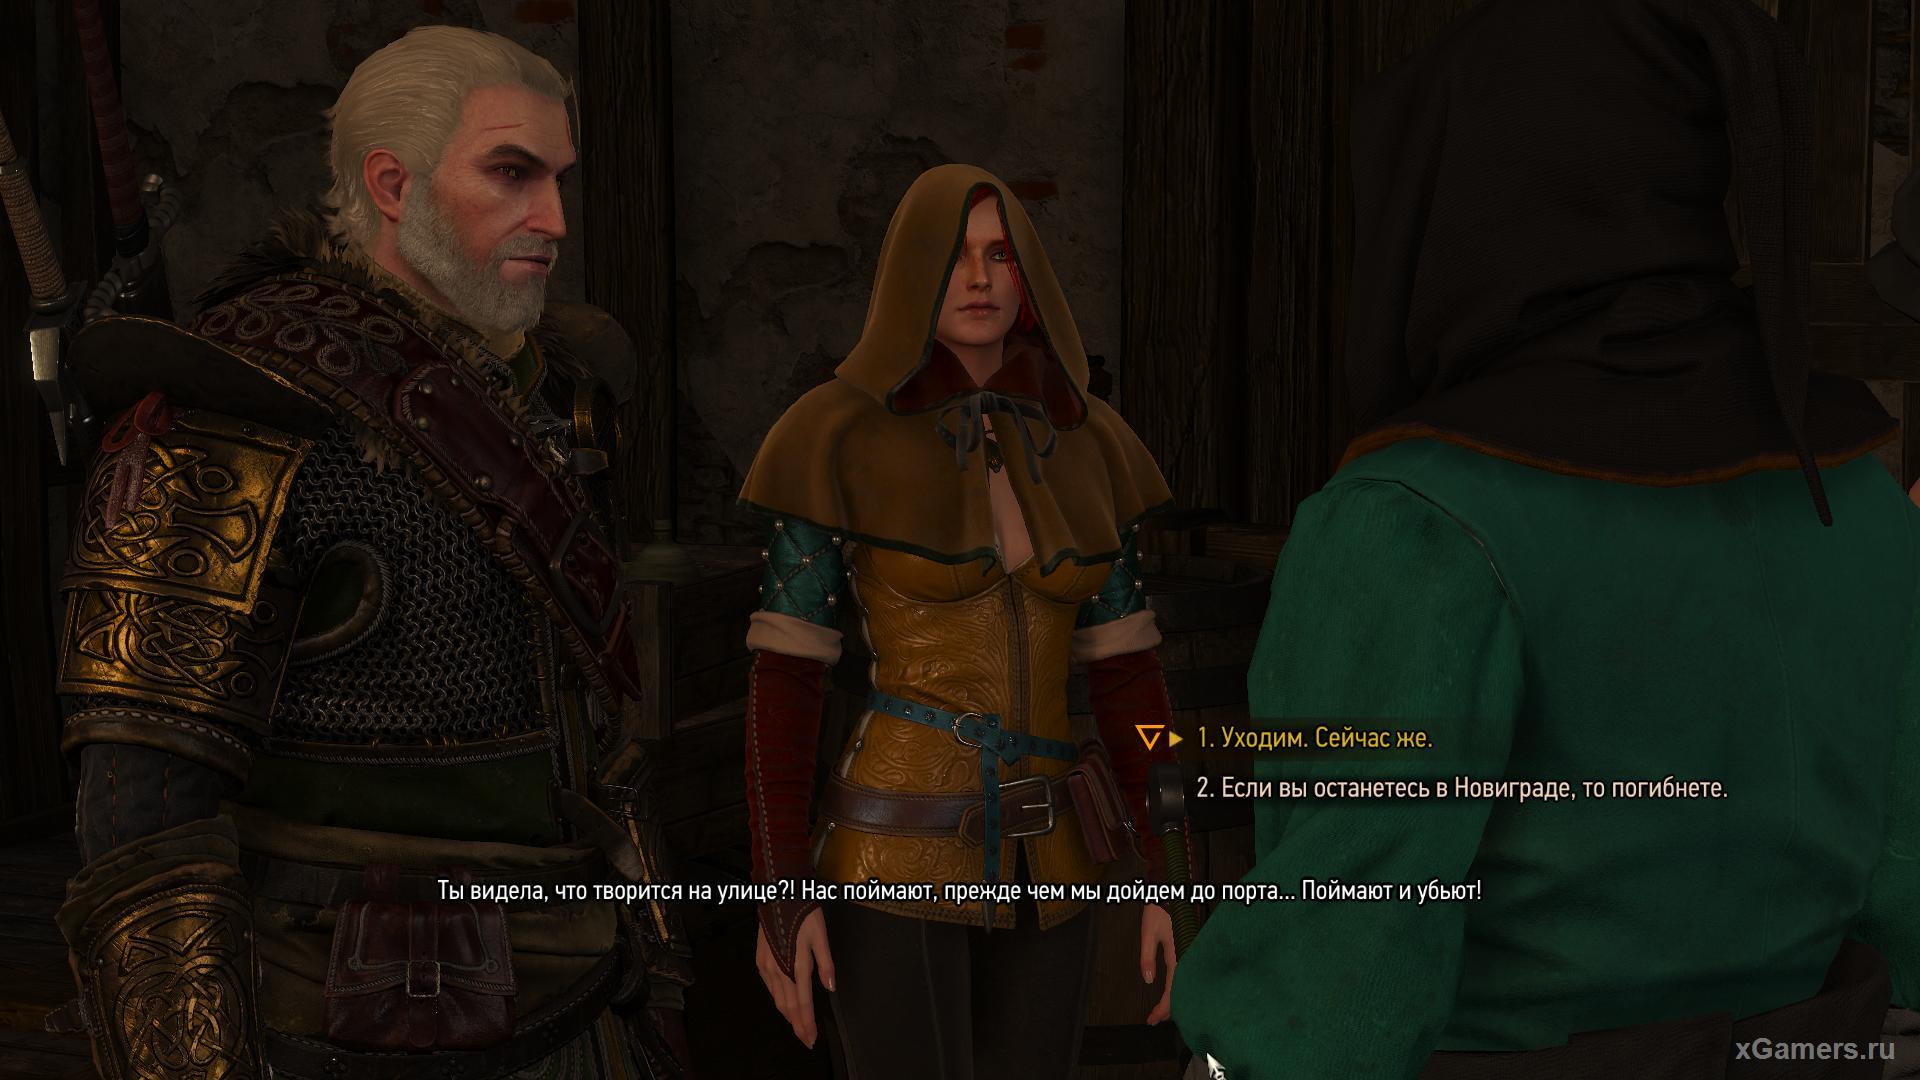 How to help Anissa and Berthold in The Witcher 3